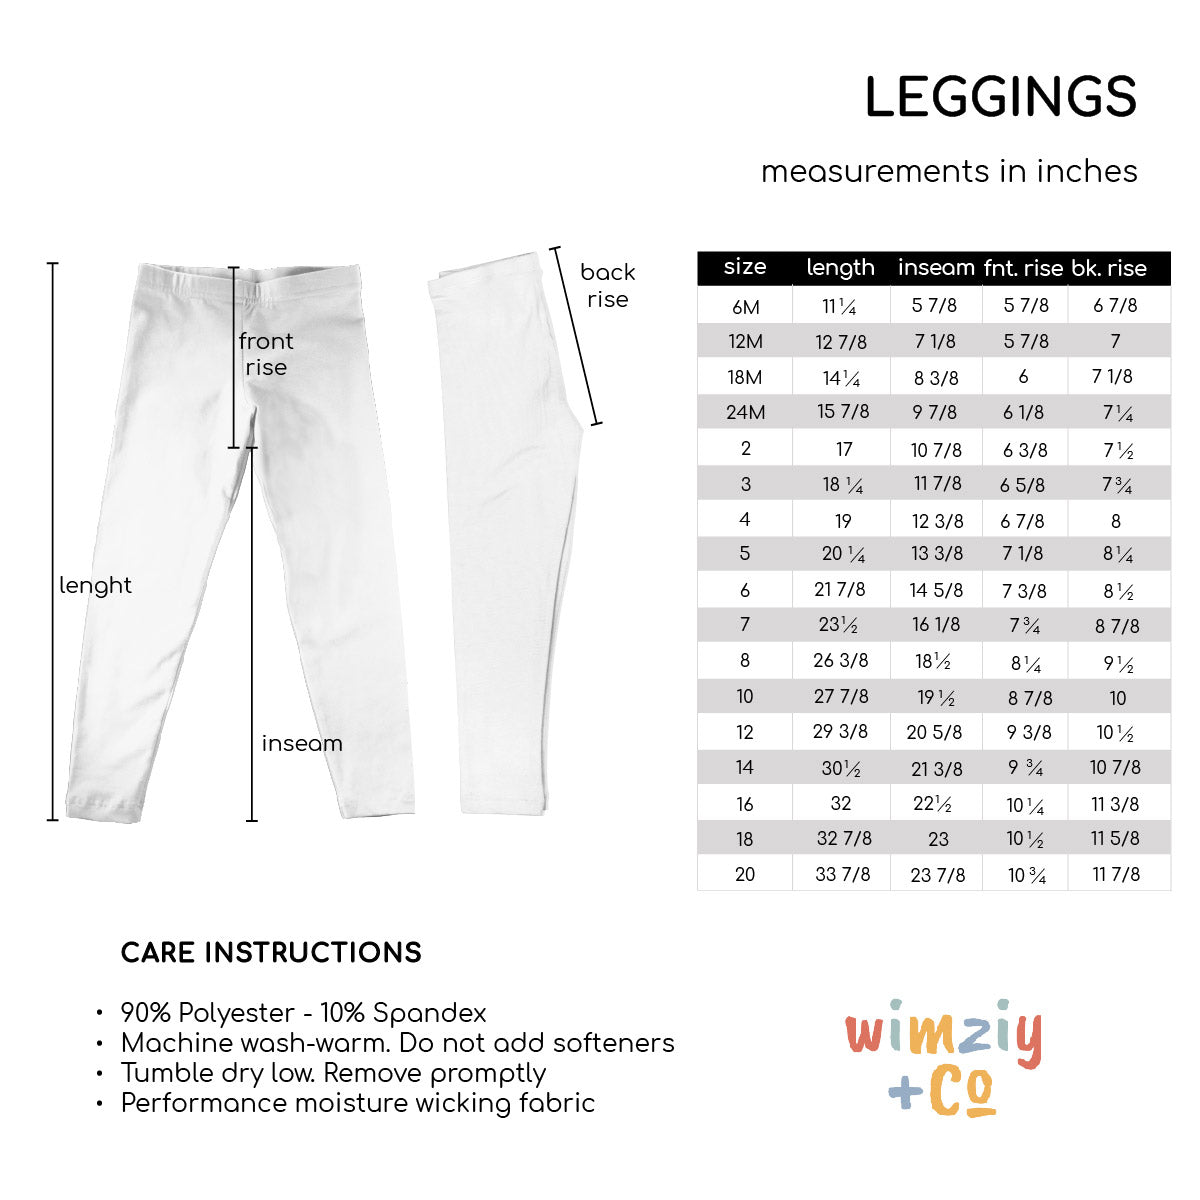 Sparkled Printed Leggings - Wimziy&Co.